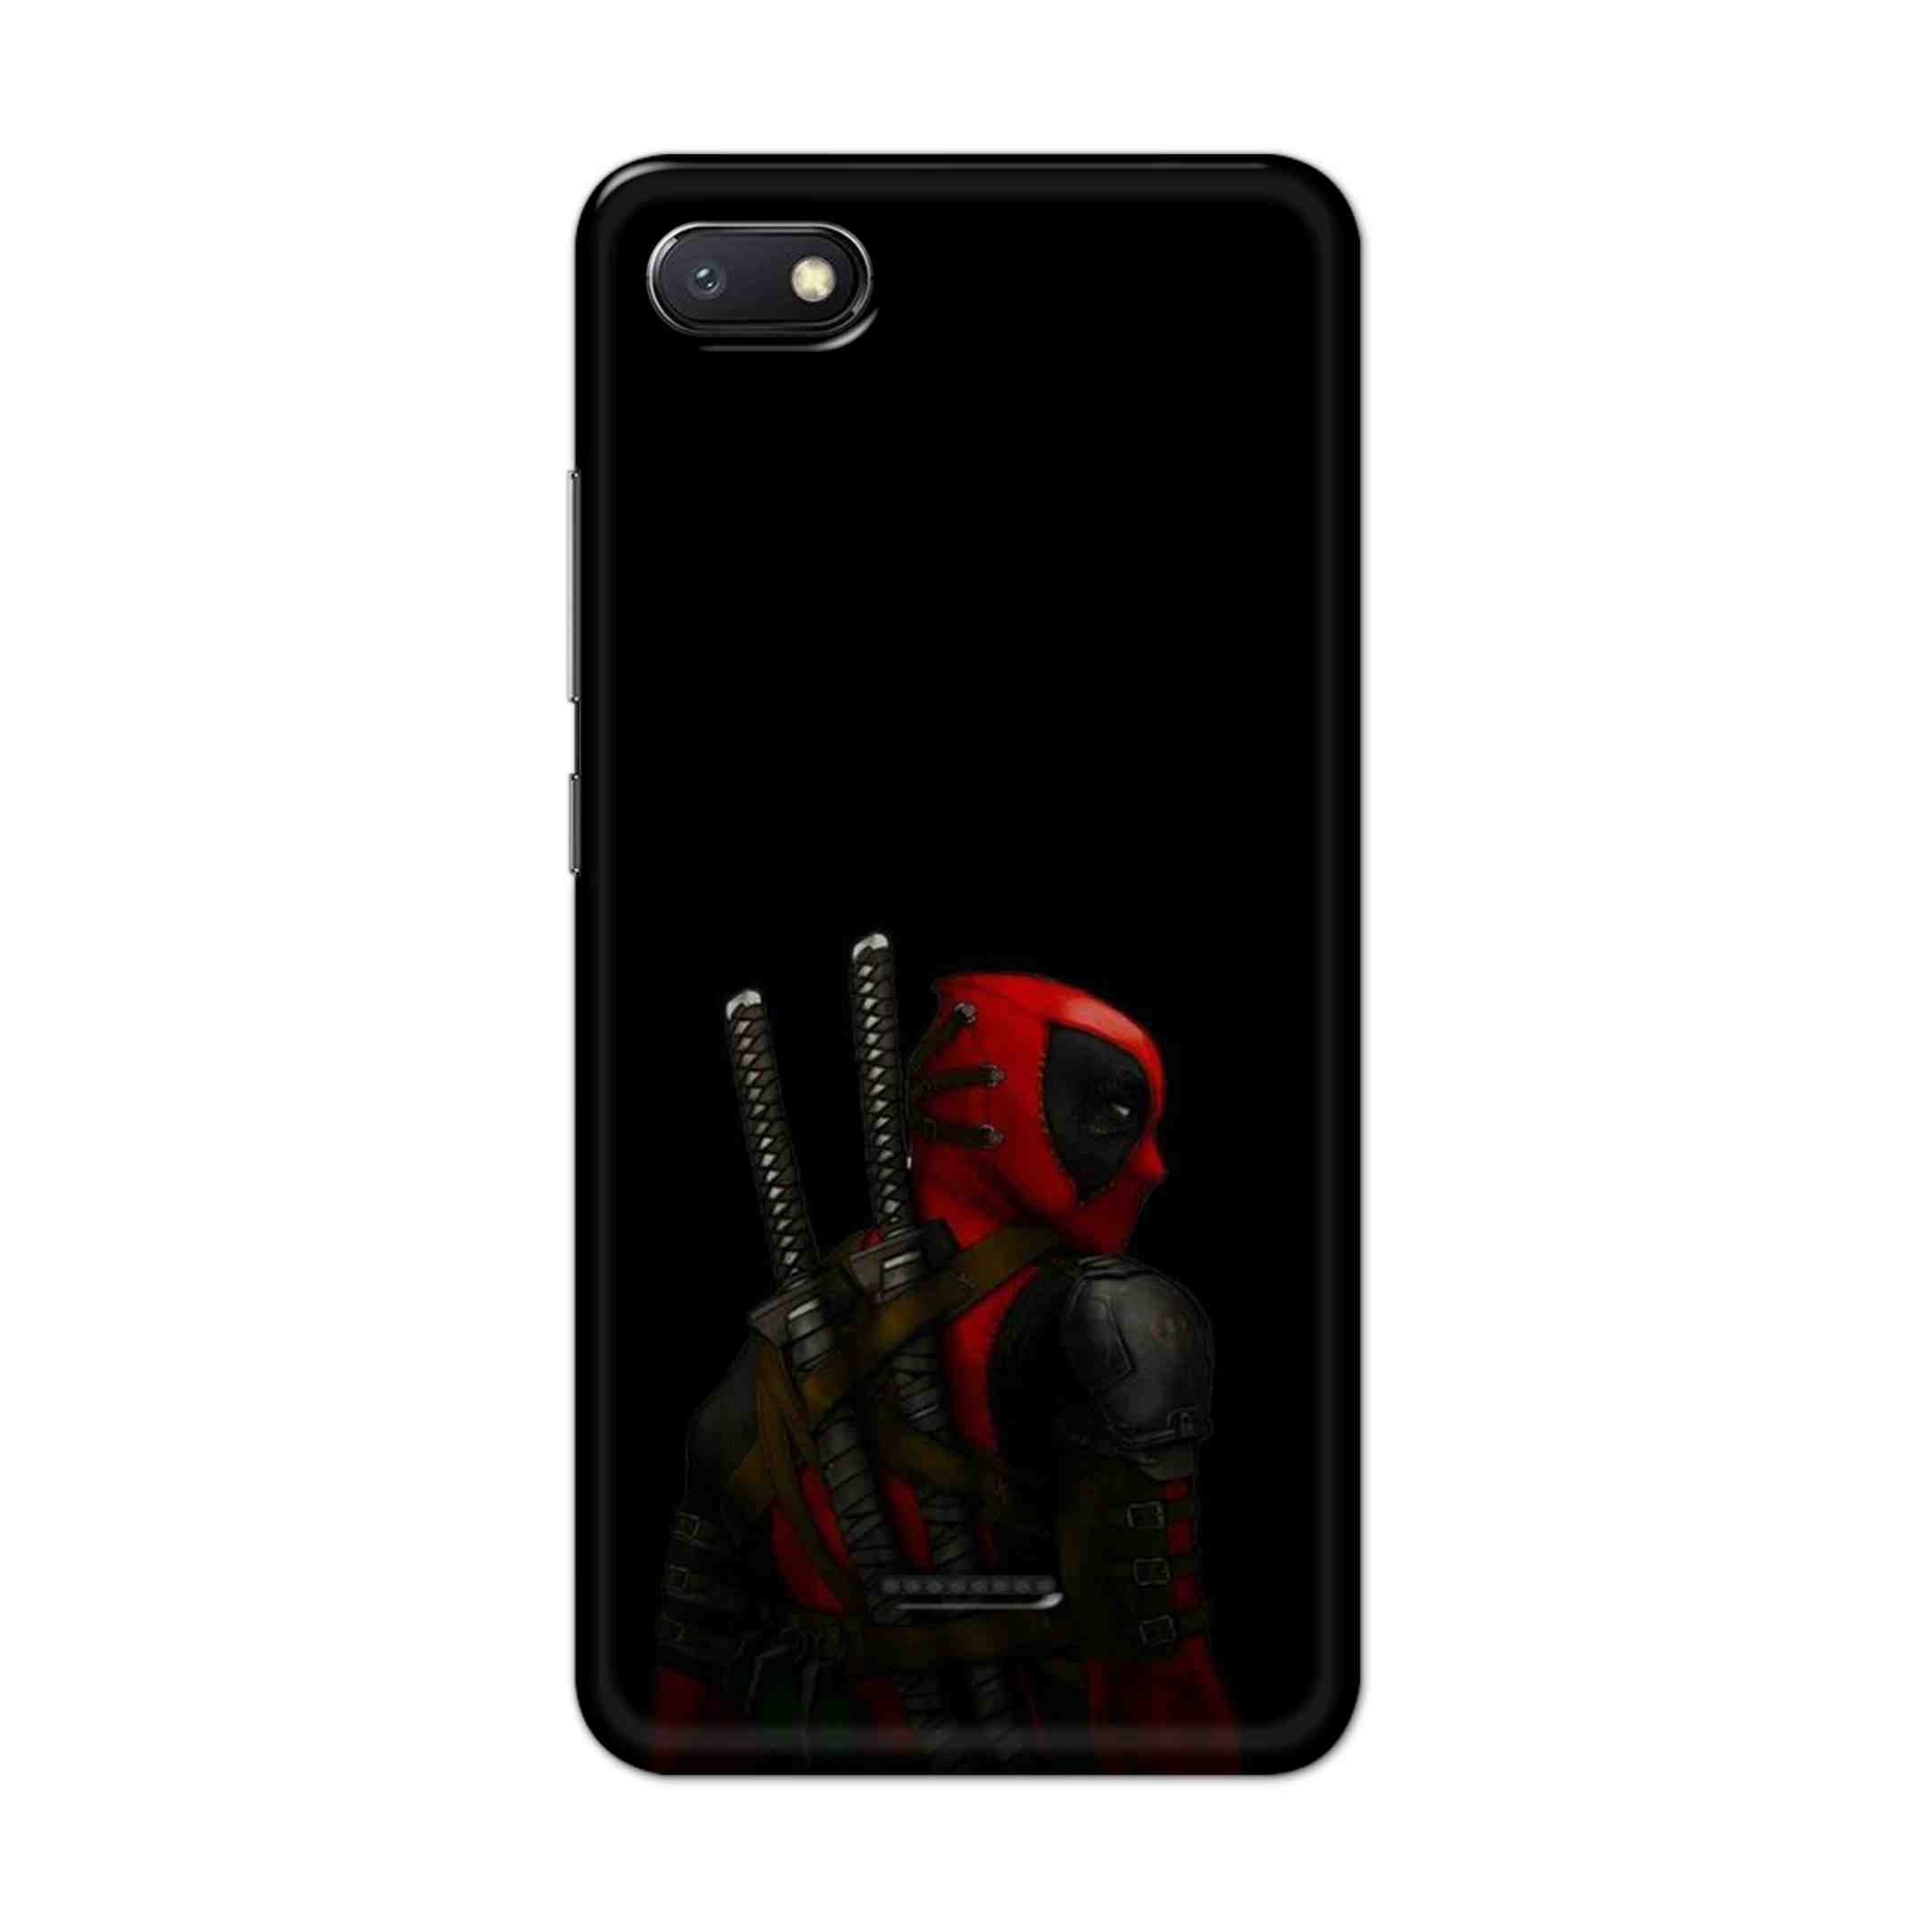 Buy Deadpool Hard Back Mobile Phone Case/Cover For Xiaomi Redmi 6A Online